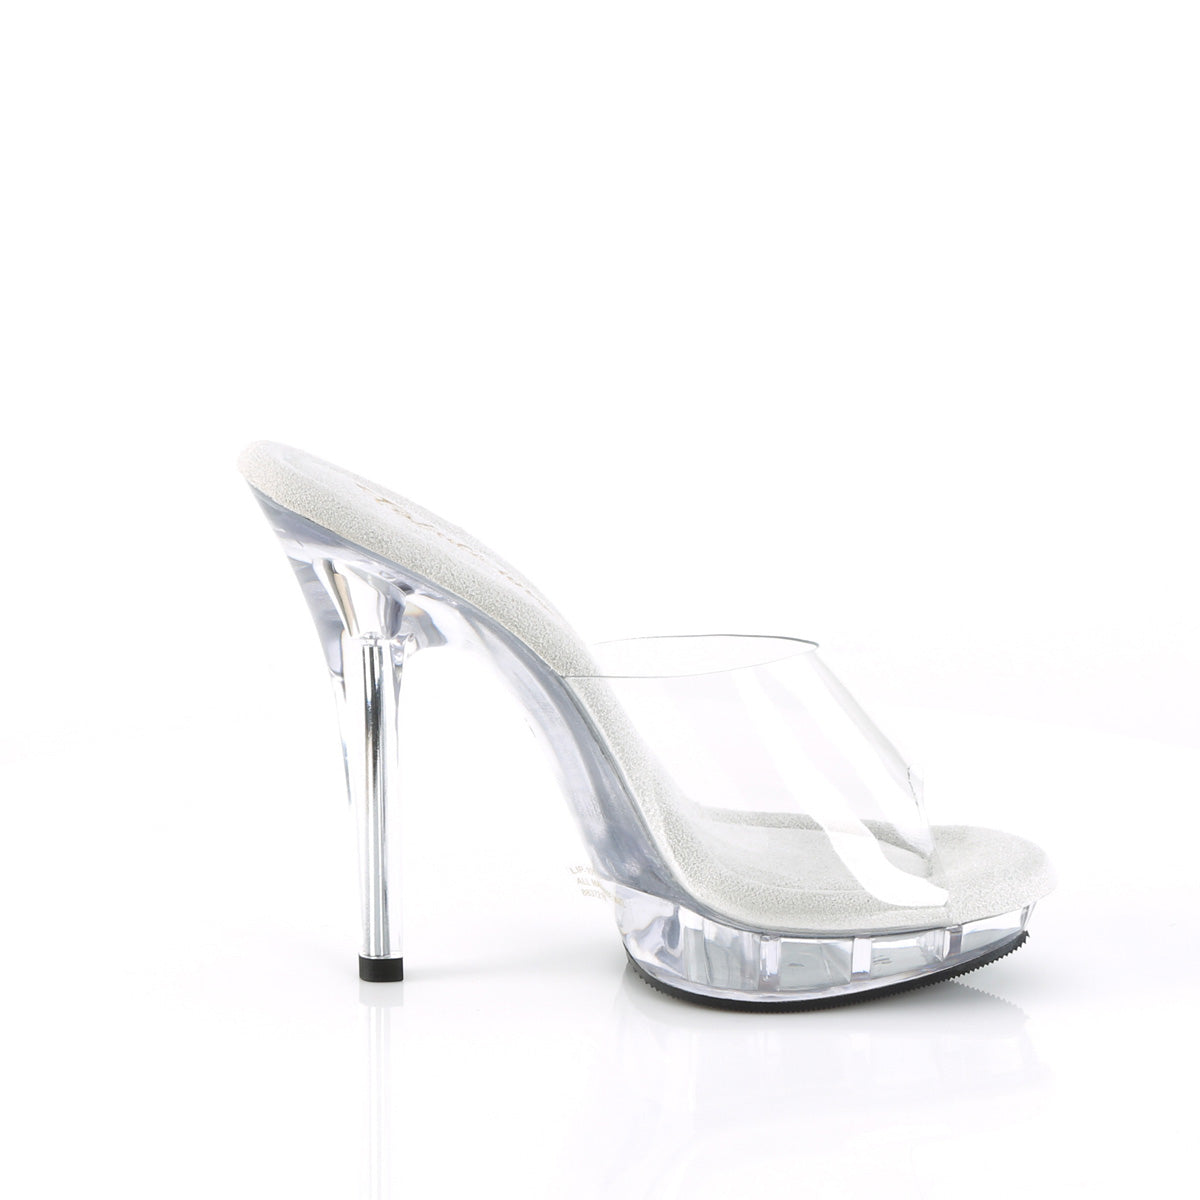 LIP-101 Fabulicious Transparent Clear Shoes [Posing Heels]